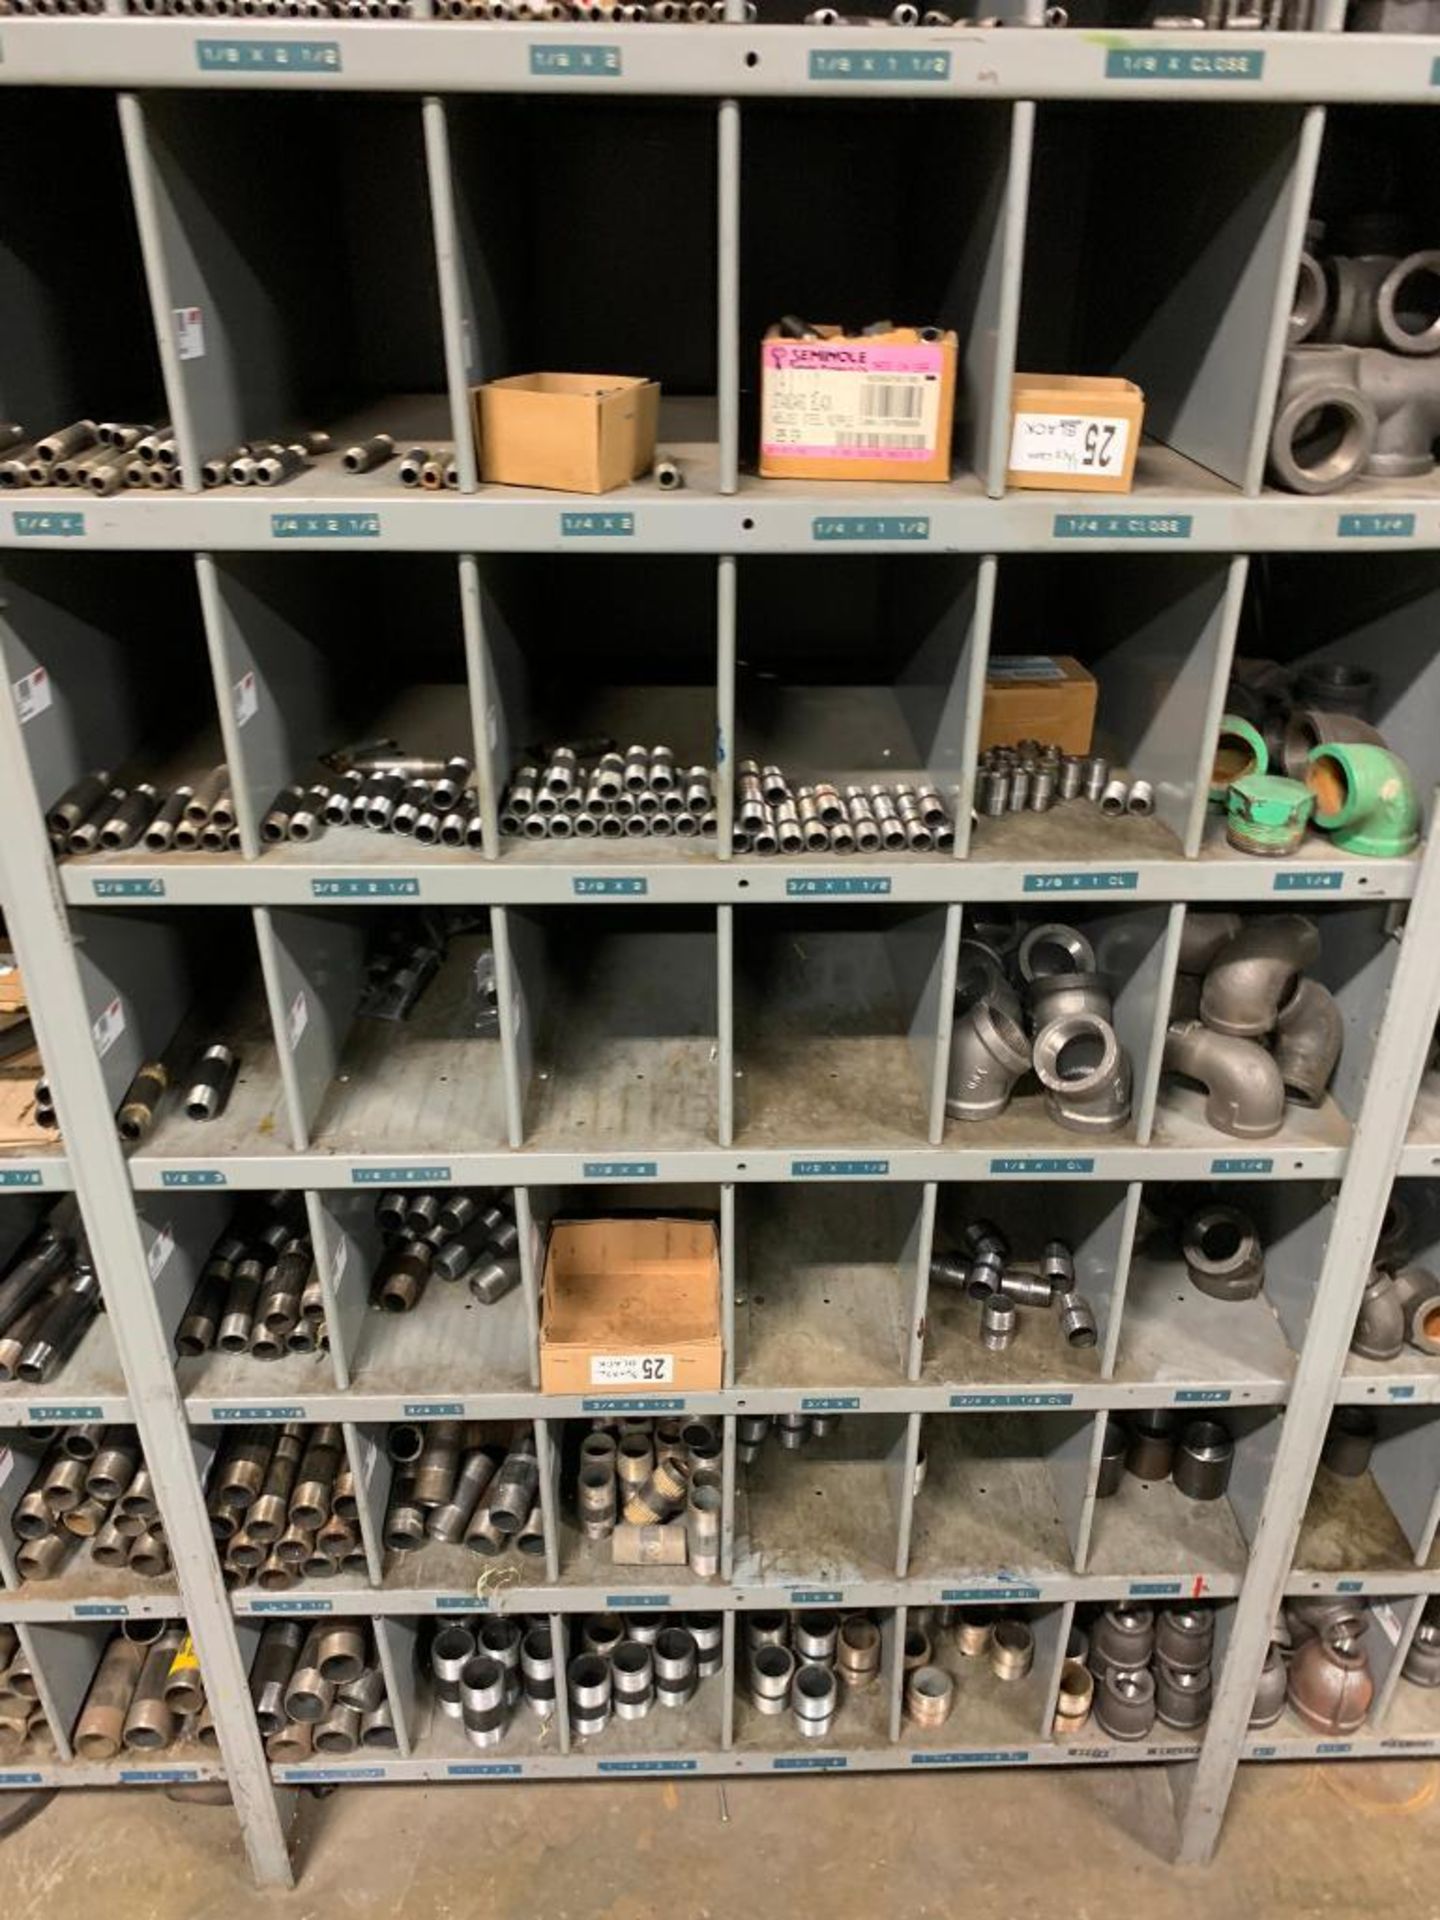 (10x) Bays of Assorted Shelving w/ Pipe Fittings, Pipe Nipples, Elbows, Connectors, Tees, Hardware - Image 10 of 21